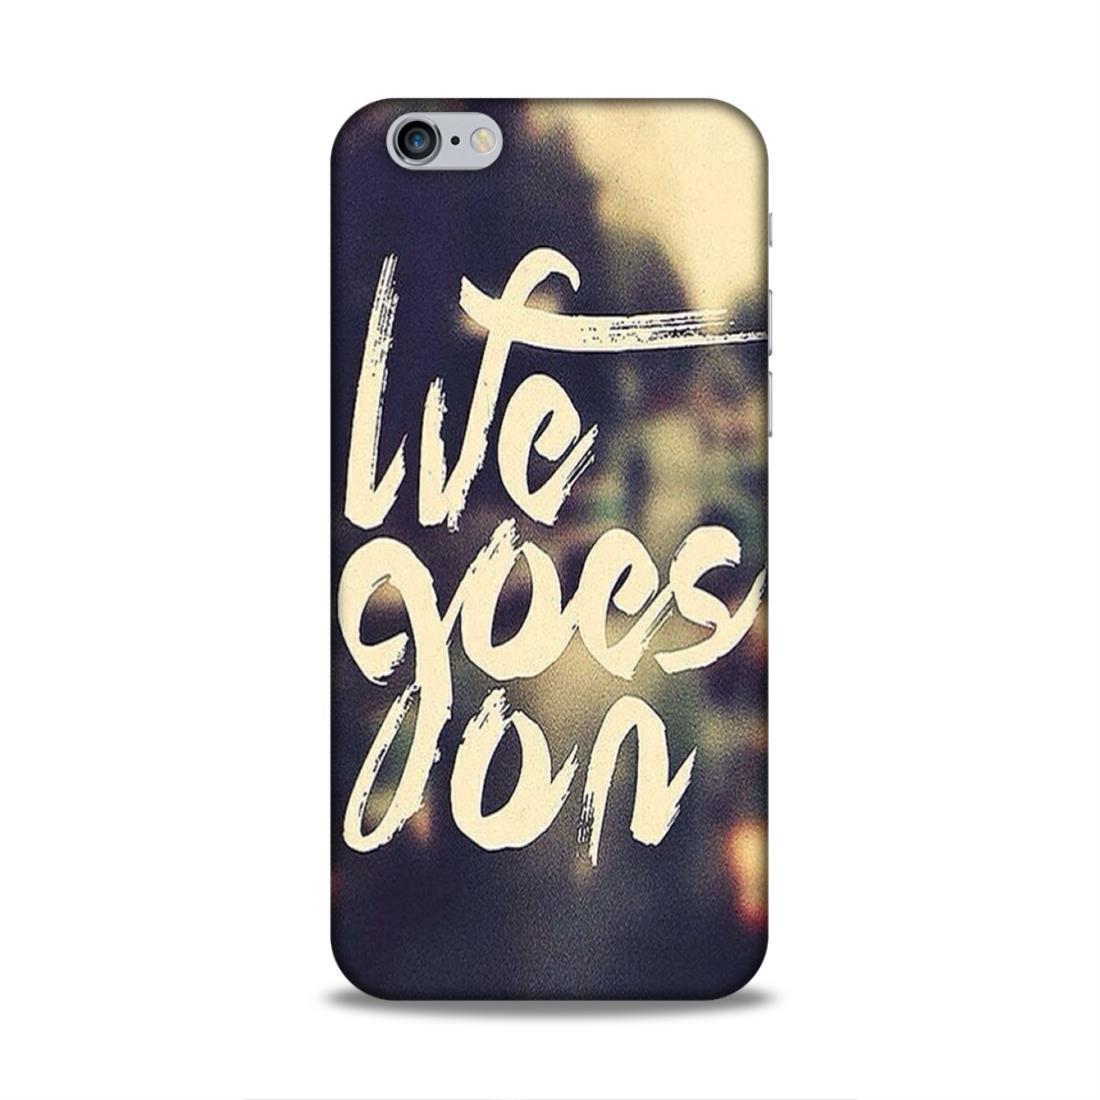 Life Goes On iPhone 6 Mobile Cover Case